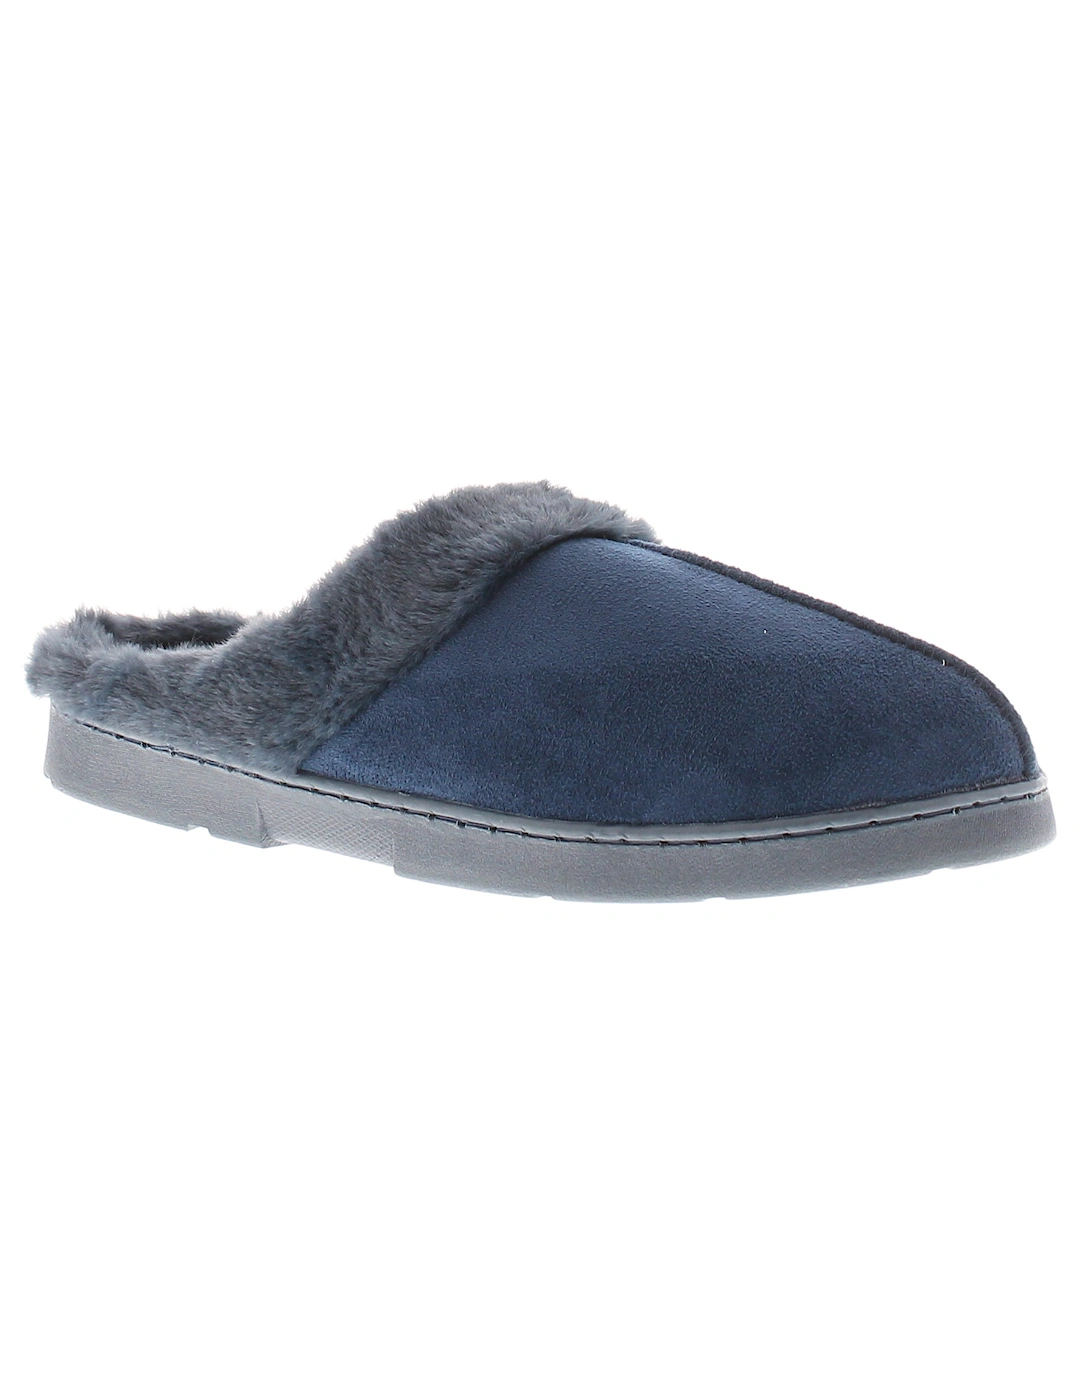 Womens Mule Slippers Decator Slip On navy UK Size, 6 of 5